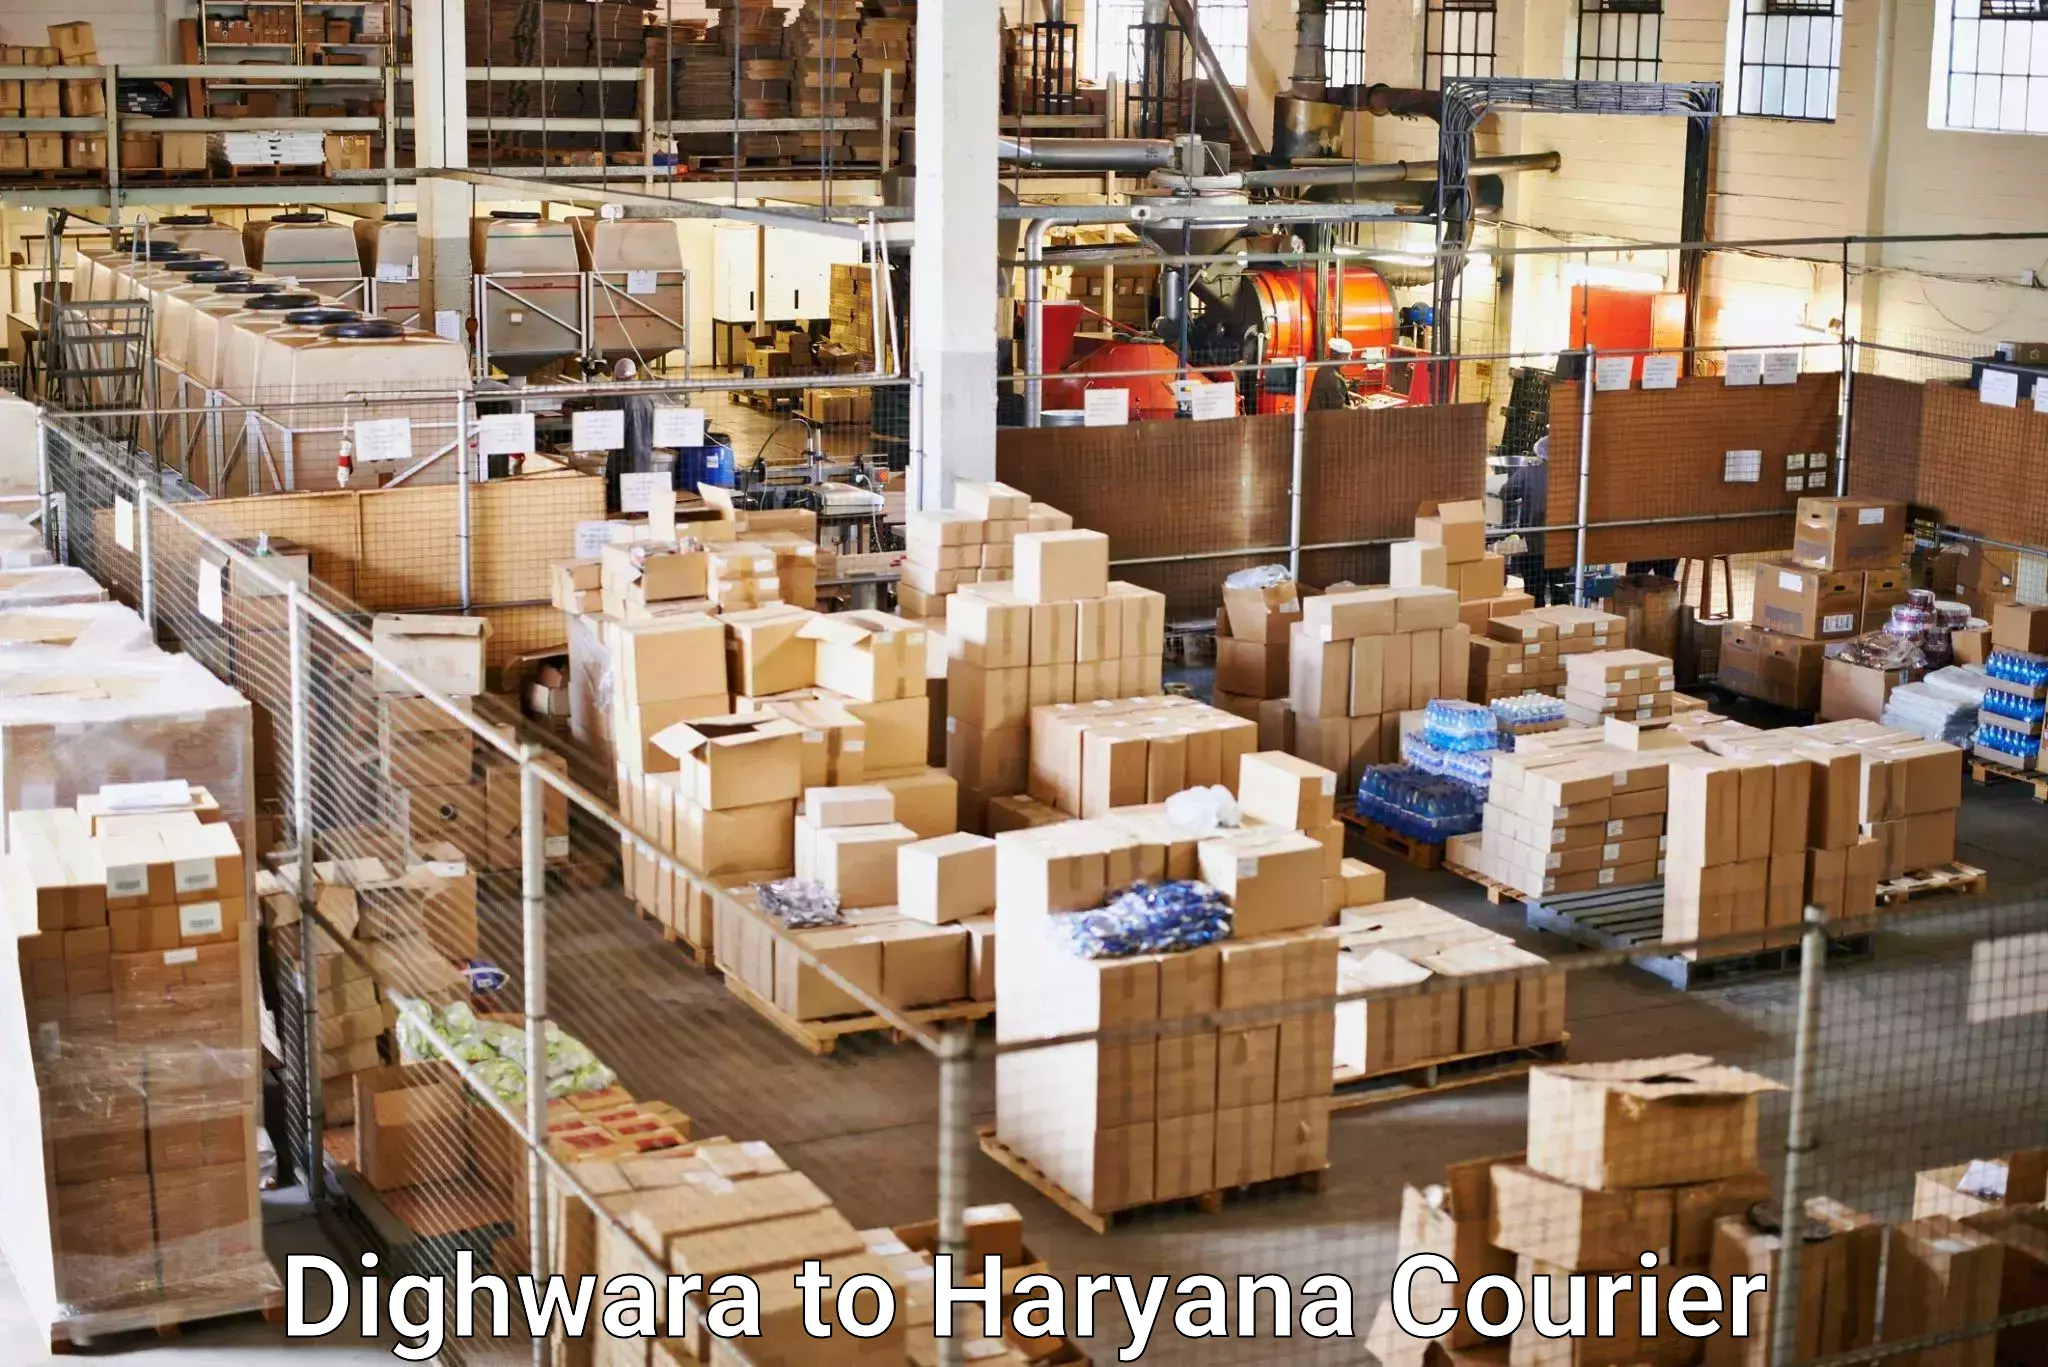 Business delivery service Dighwara to Chaudhary Charan Singh Haryana Agricultural University Hisar